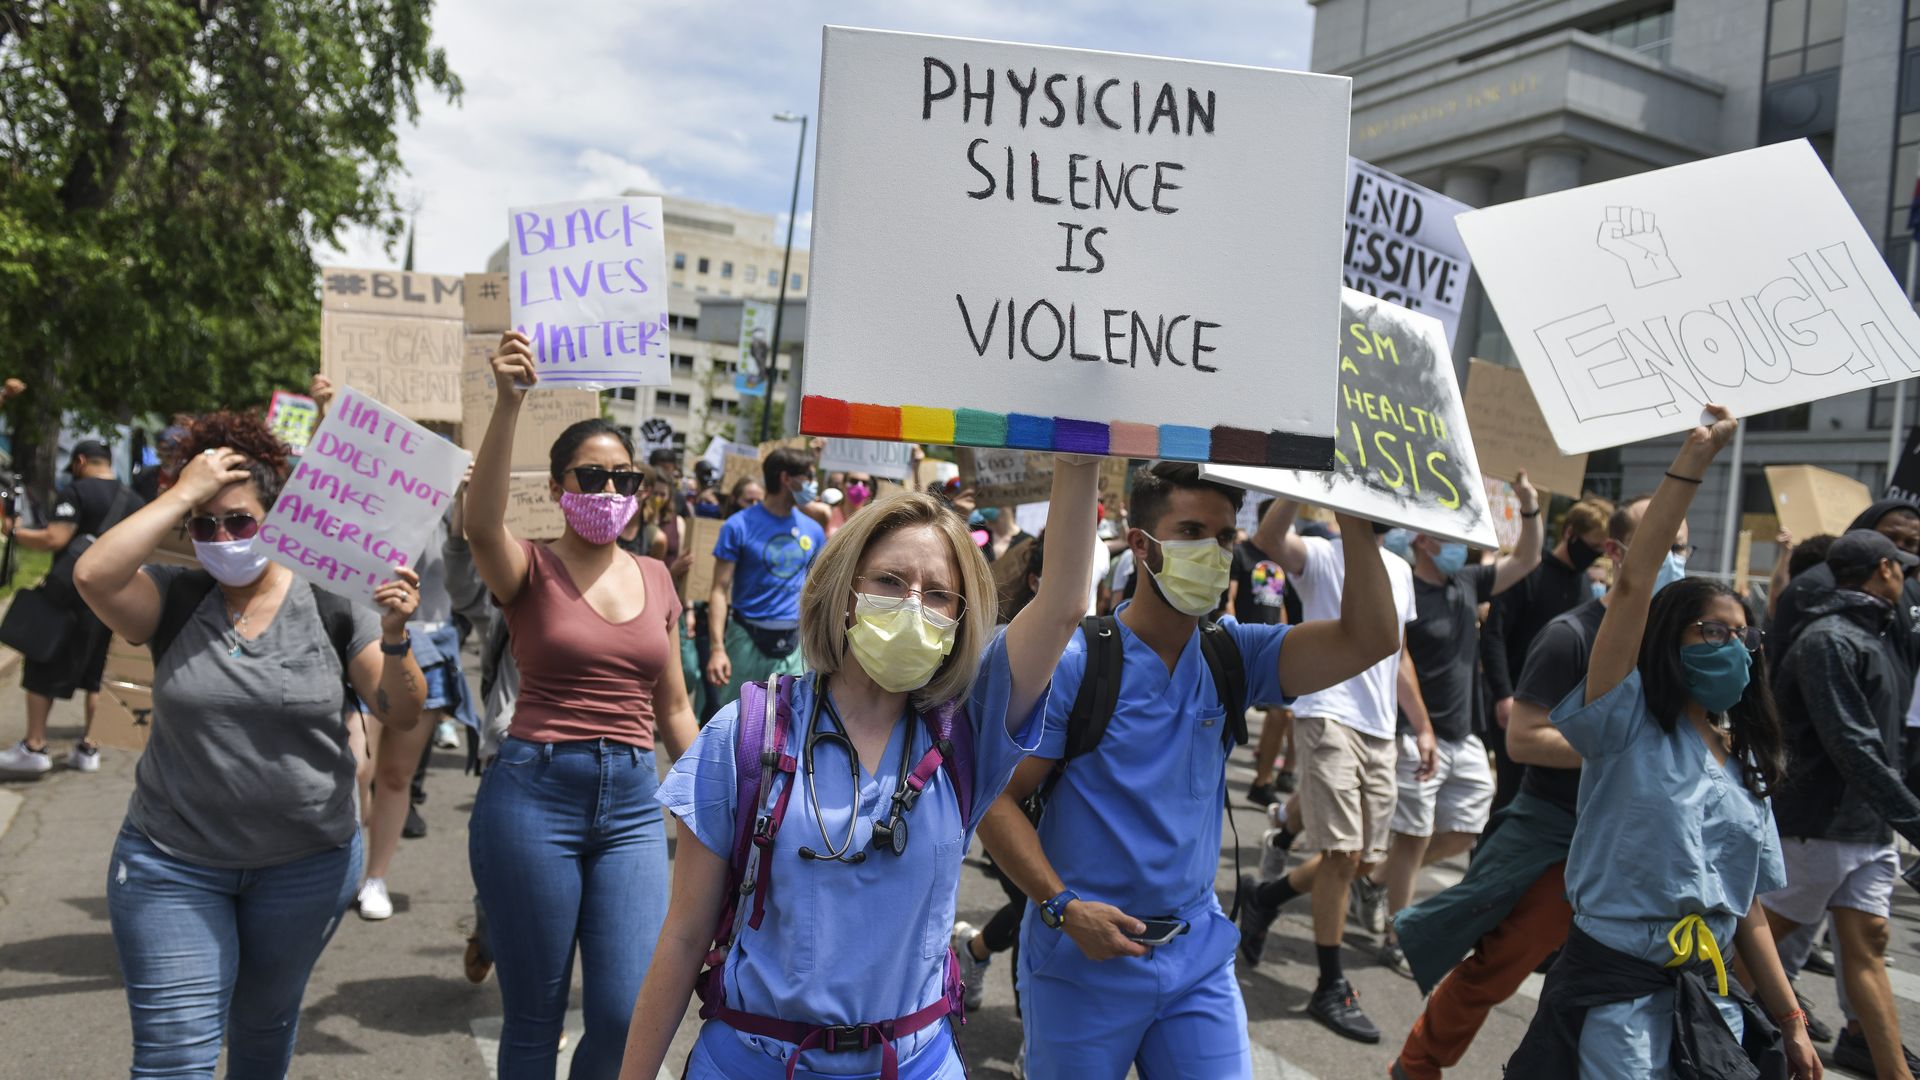 Physicians march with people protesting in Denver, Colorado